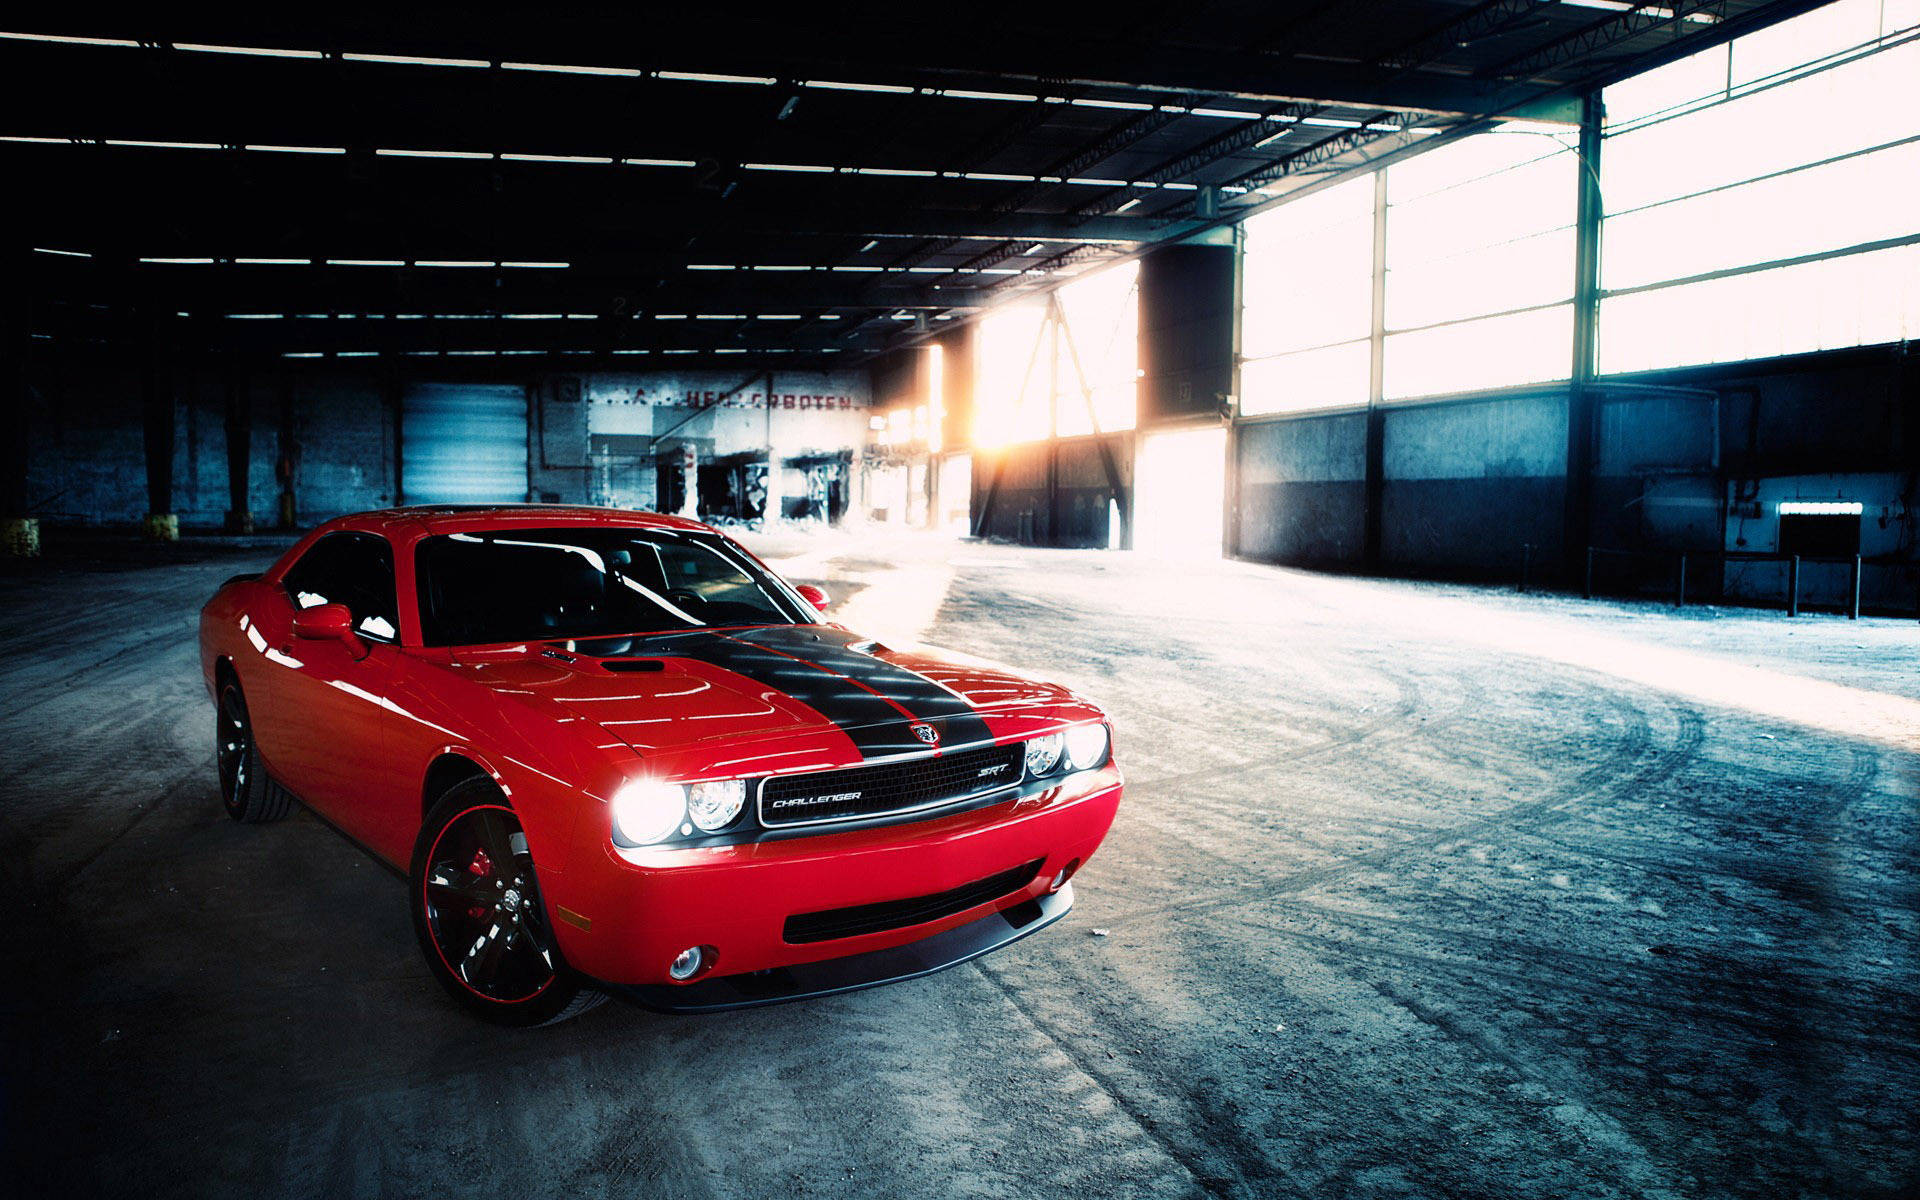 Unleash your wild side with the fierce Dodge Challenger SRT in striking red. Wallpaper